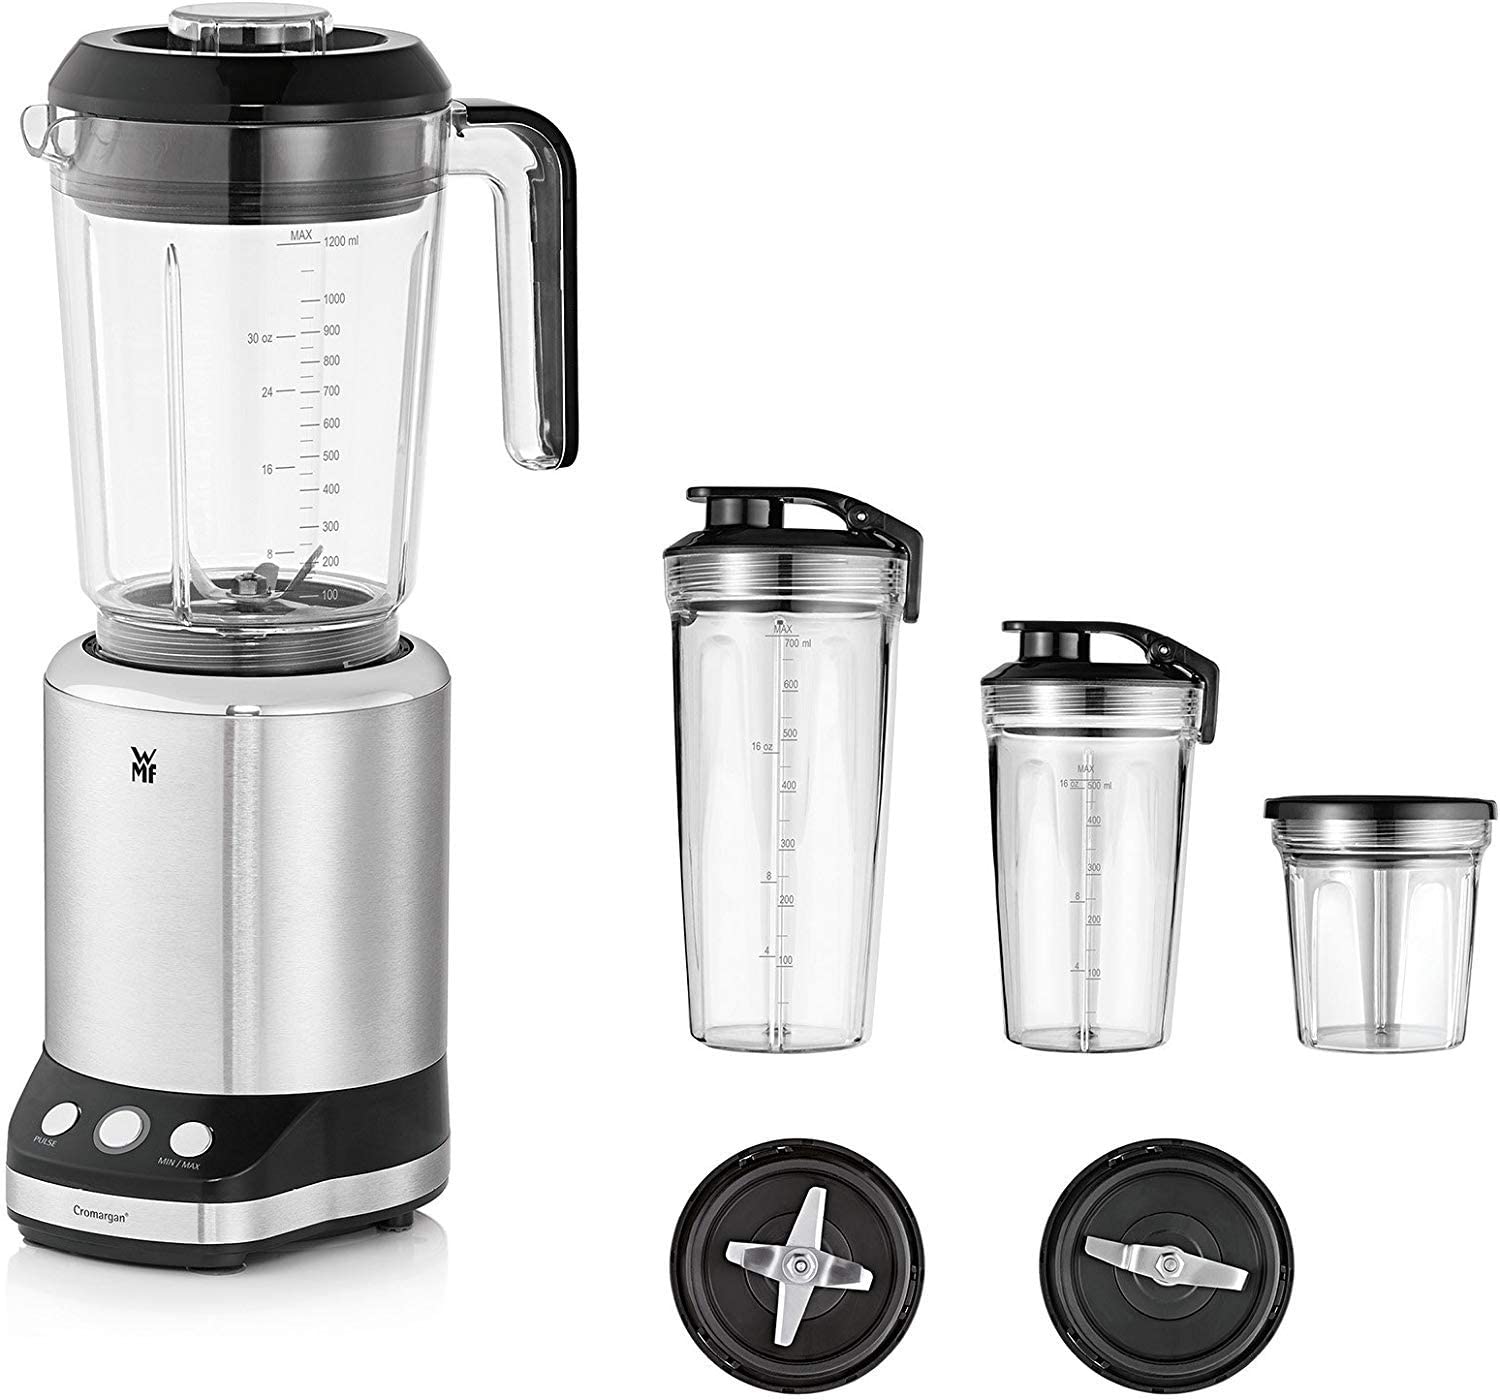 WMF Kult X Multi-Function Mixer 25,000 RPM 900 Watts 2 Speeds 4 Mixing Container ToGo Bottle Knife Unit with Cross Blades for Smoothies Knife Unit with Flat Blades